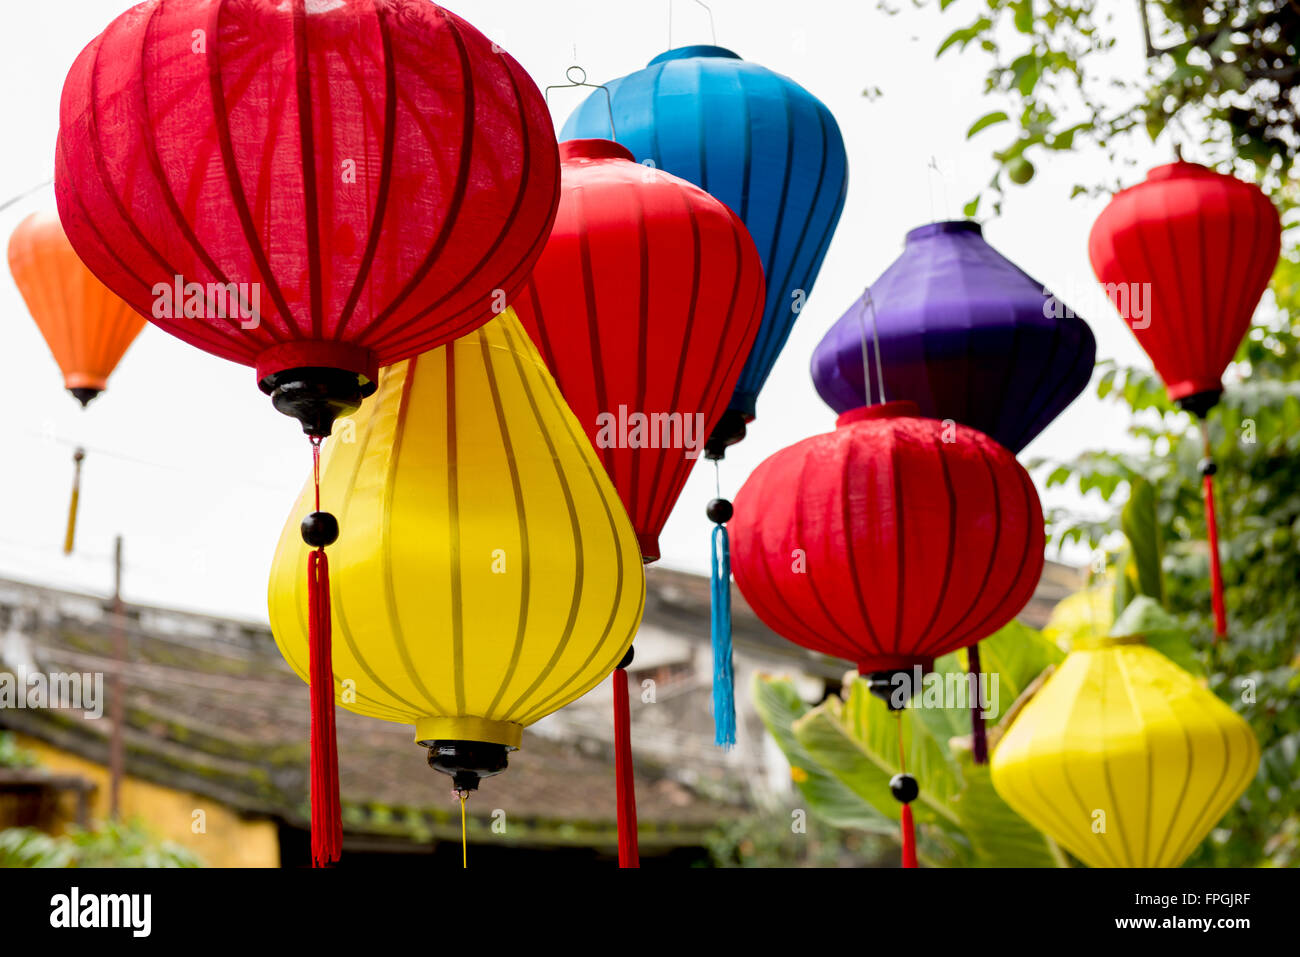 HOI AN, VIETNAM - JANUARY 25, 2016: Decorations for Tet, the Vietnamese New Year which takes place on February 8th which is the  Stock Photo